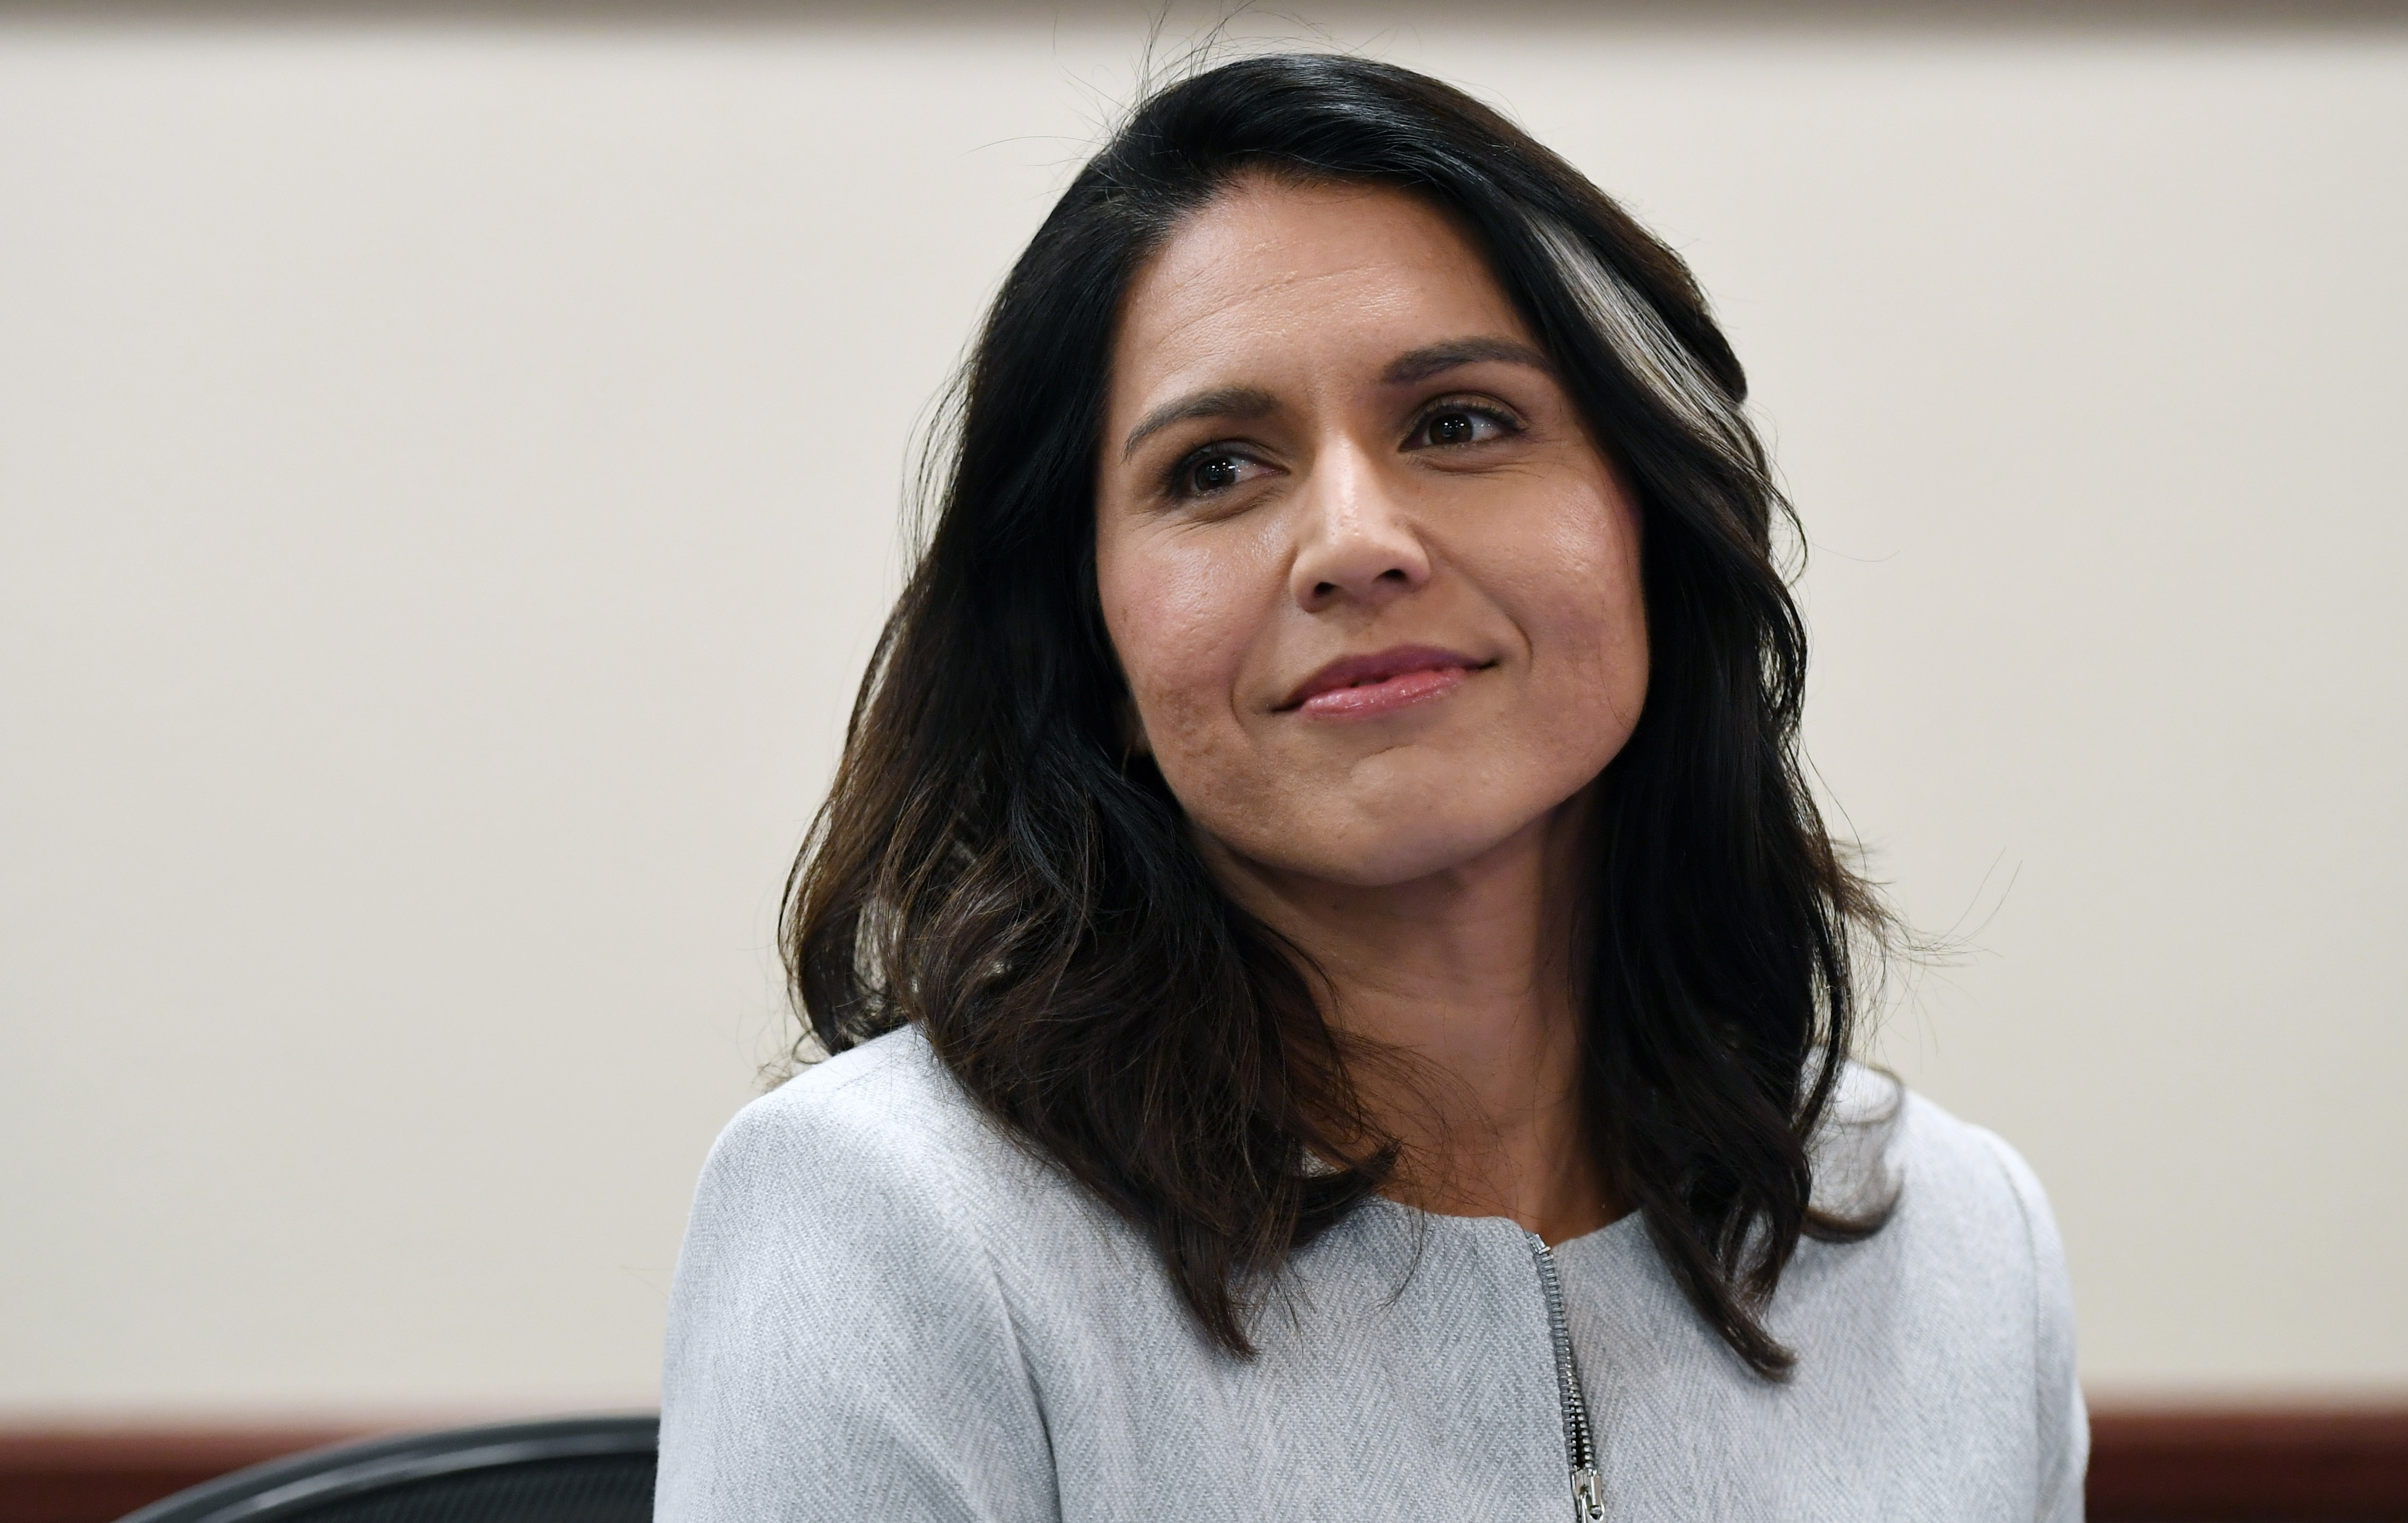 U.S. Rep. Tulsi Gabbard (D-HI) attends a meet-and-greet at United Way of Southern Nevada on March 18, 2019 in Las Vegas, Nevada. (Ethan Miller—Getty Images)